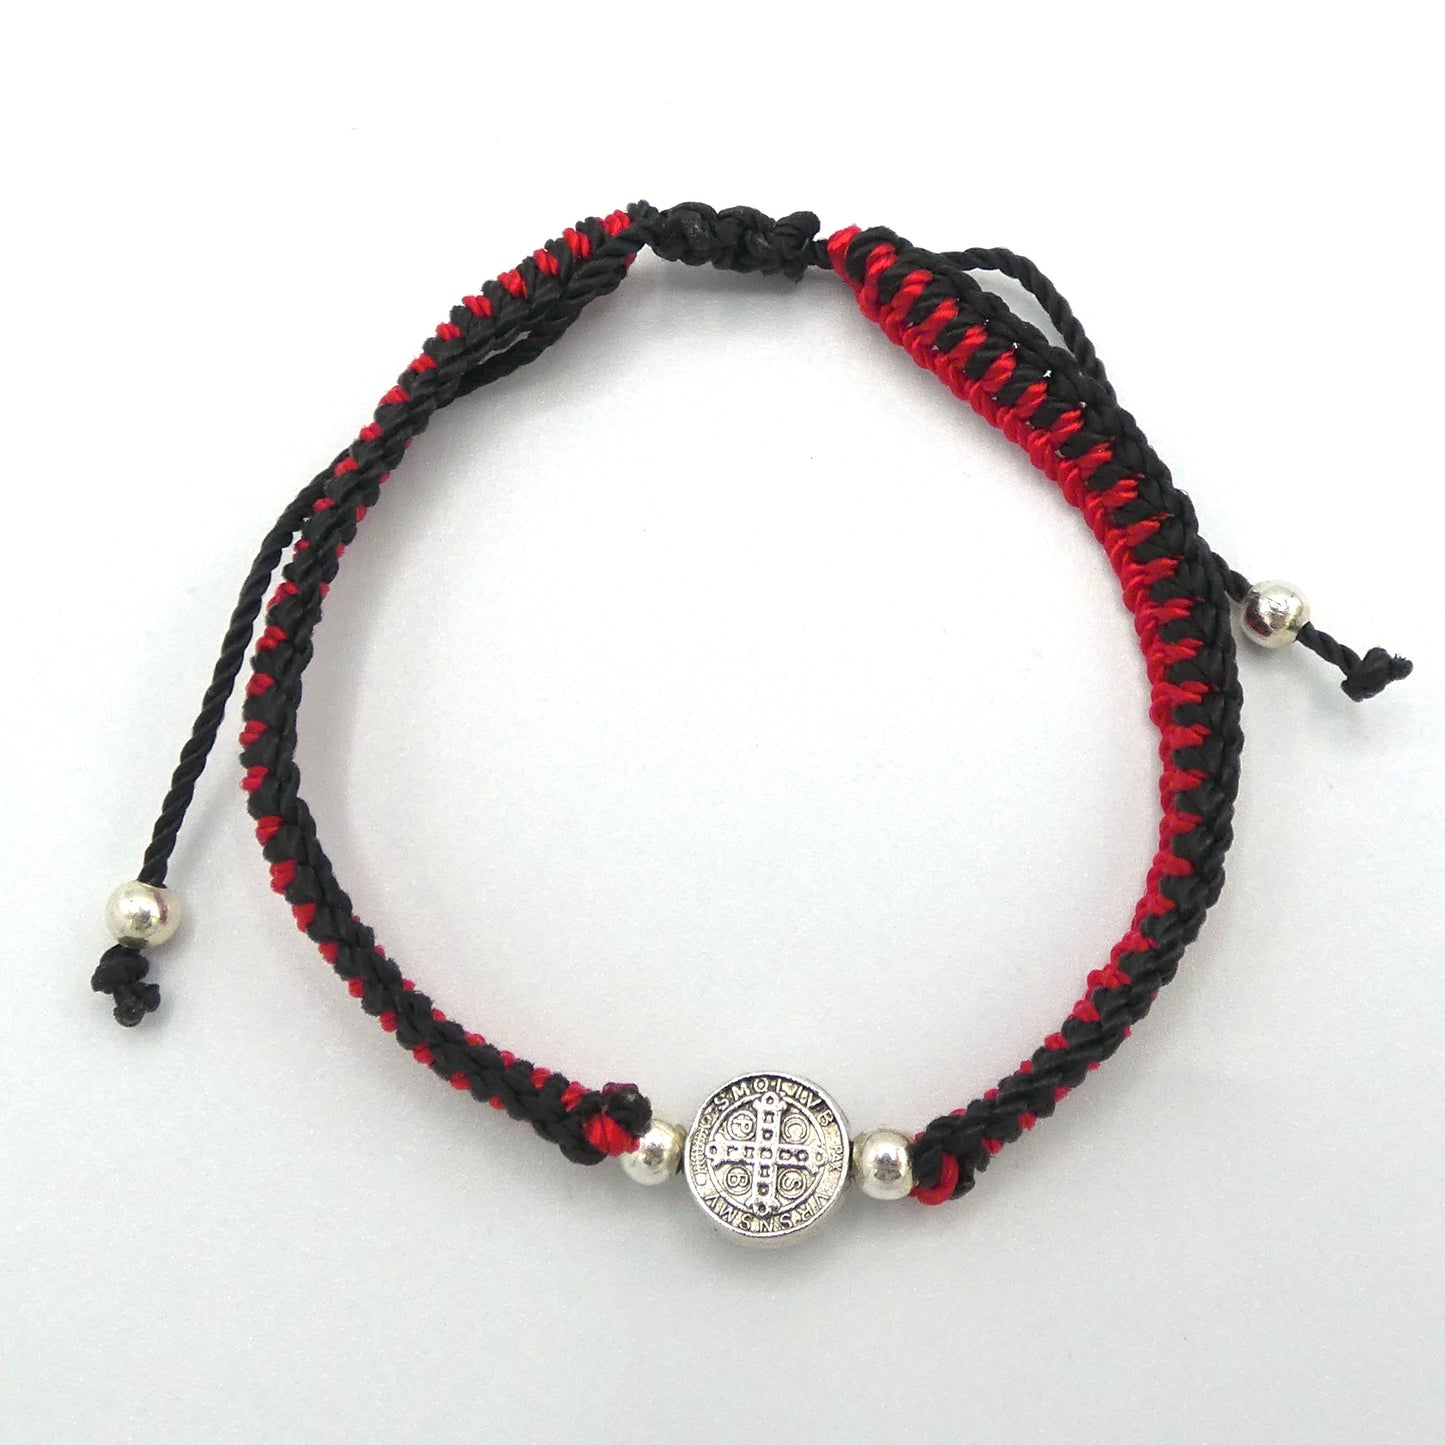 Braided Bracelet of Assorted Colors with St. Benedict Medal